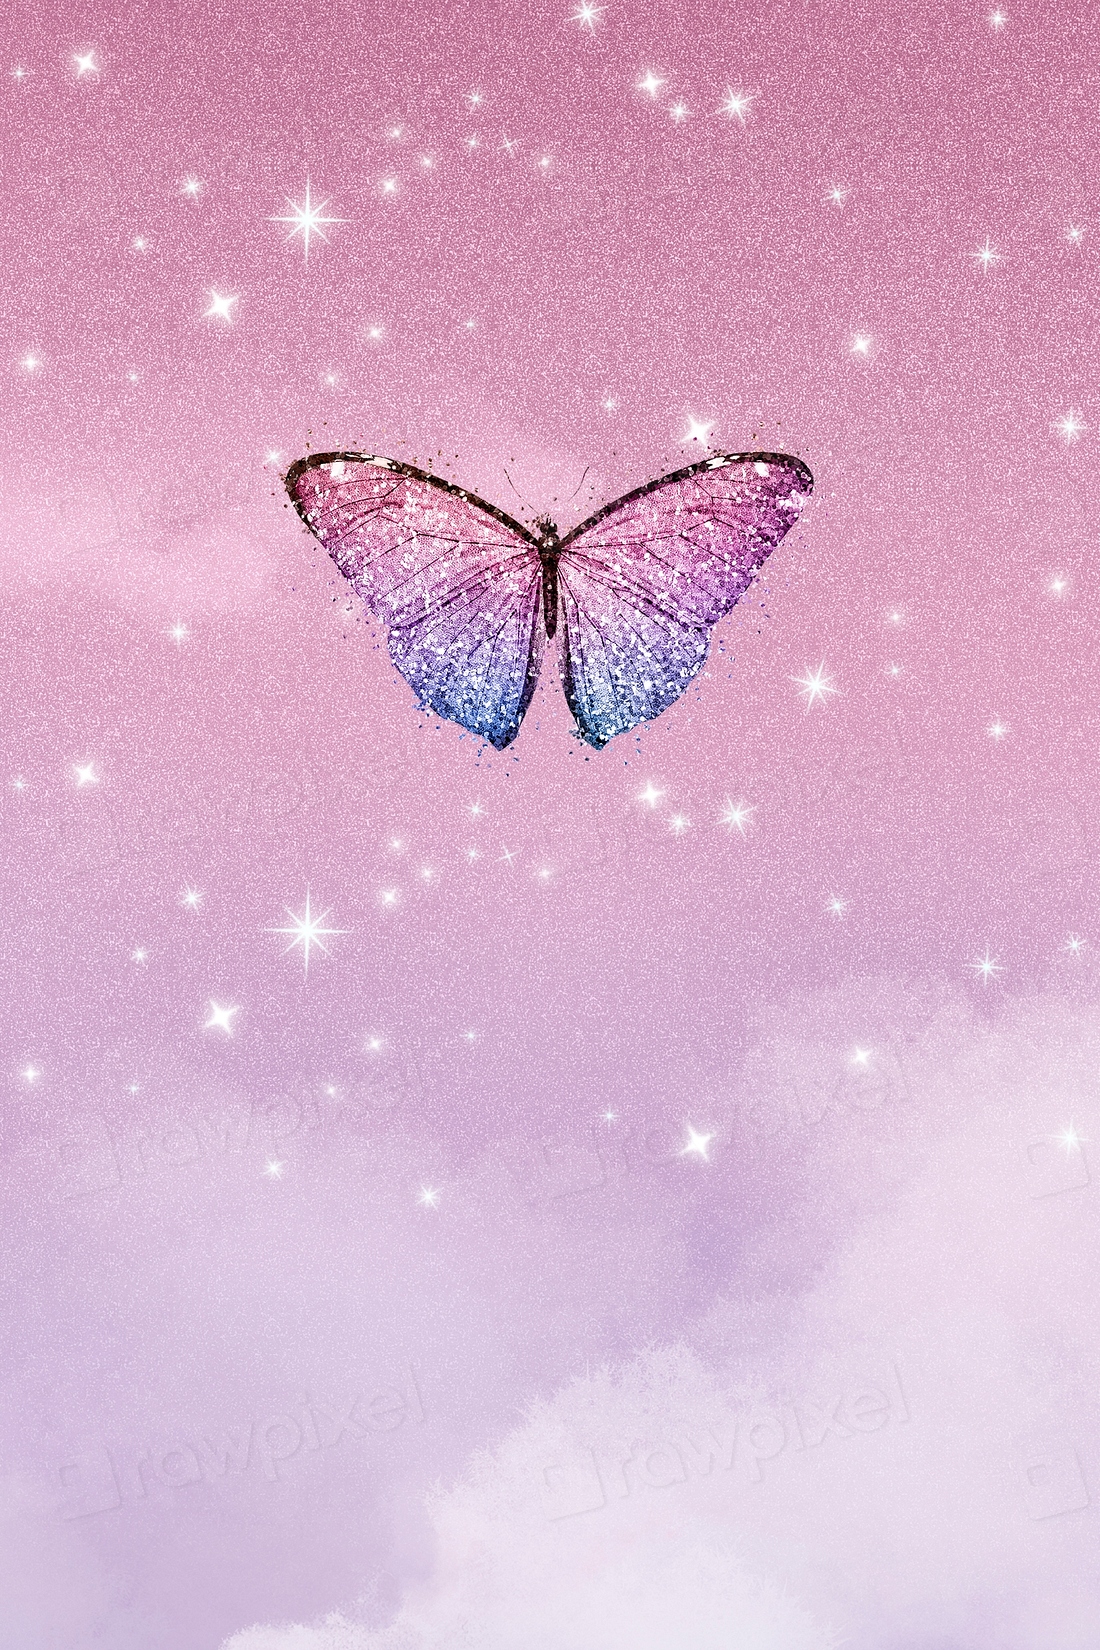 Butterfly aesthetic background, pink design | Free Photo - rawpixel